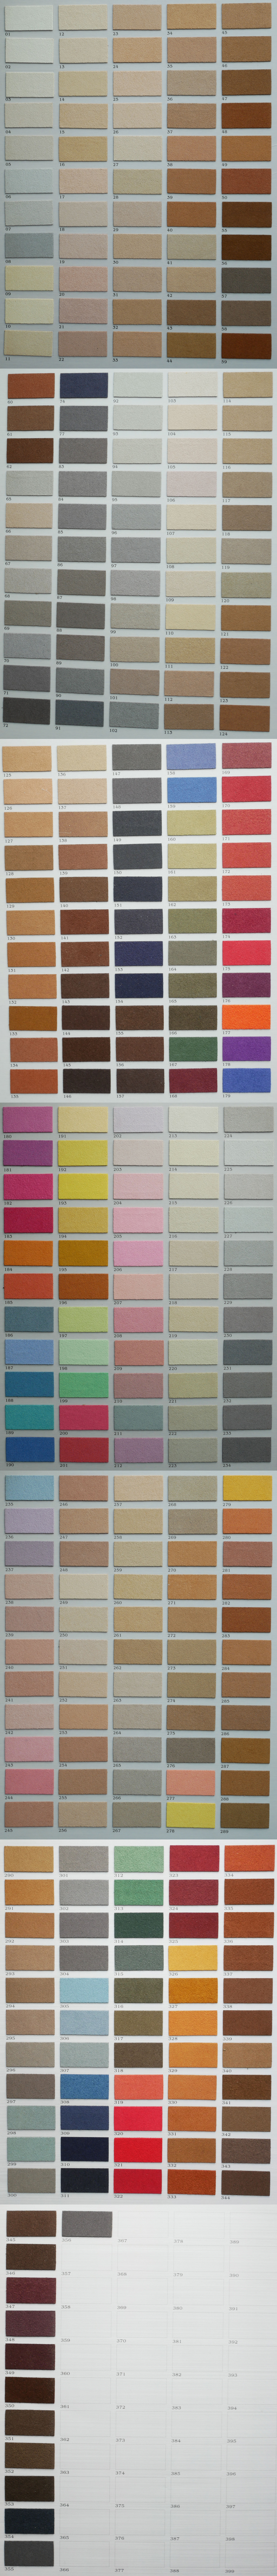 Suede Leather Fabric Color Chart